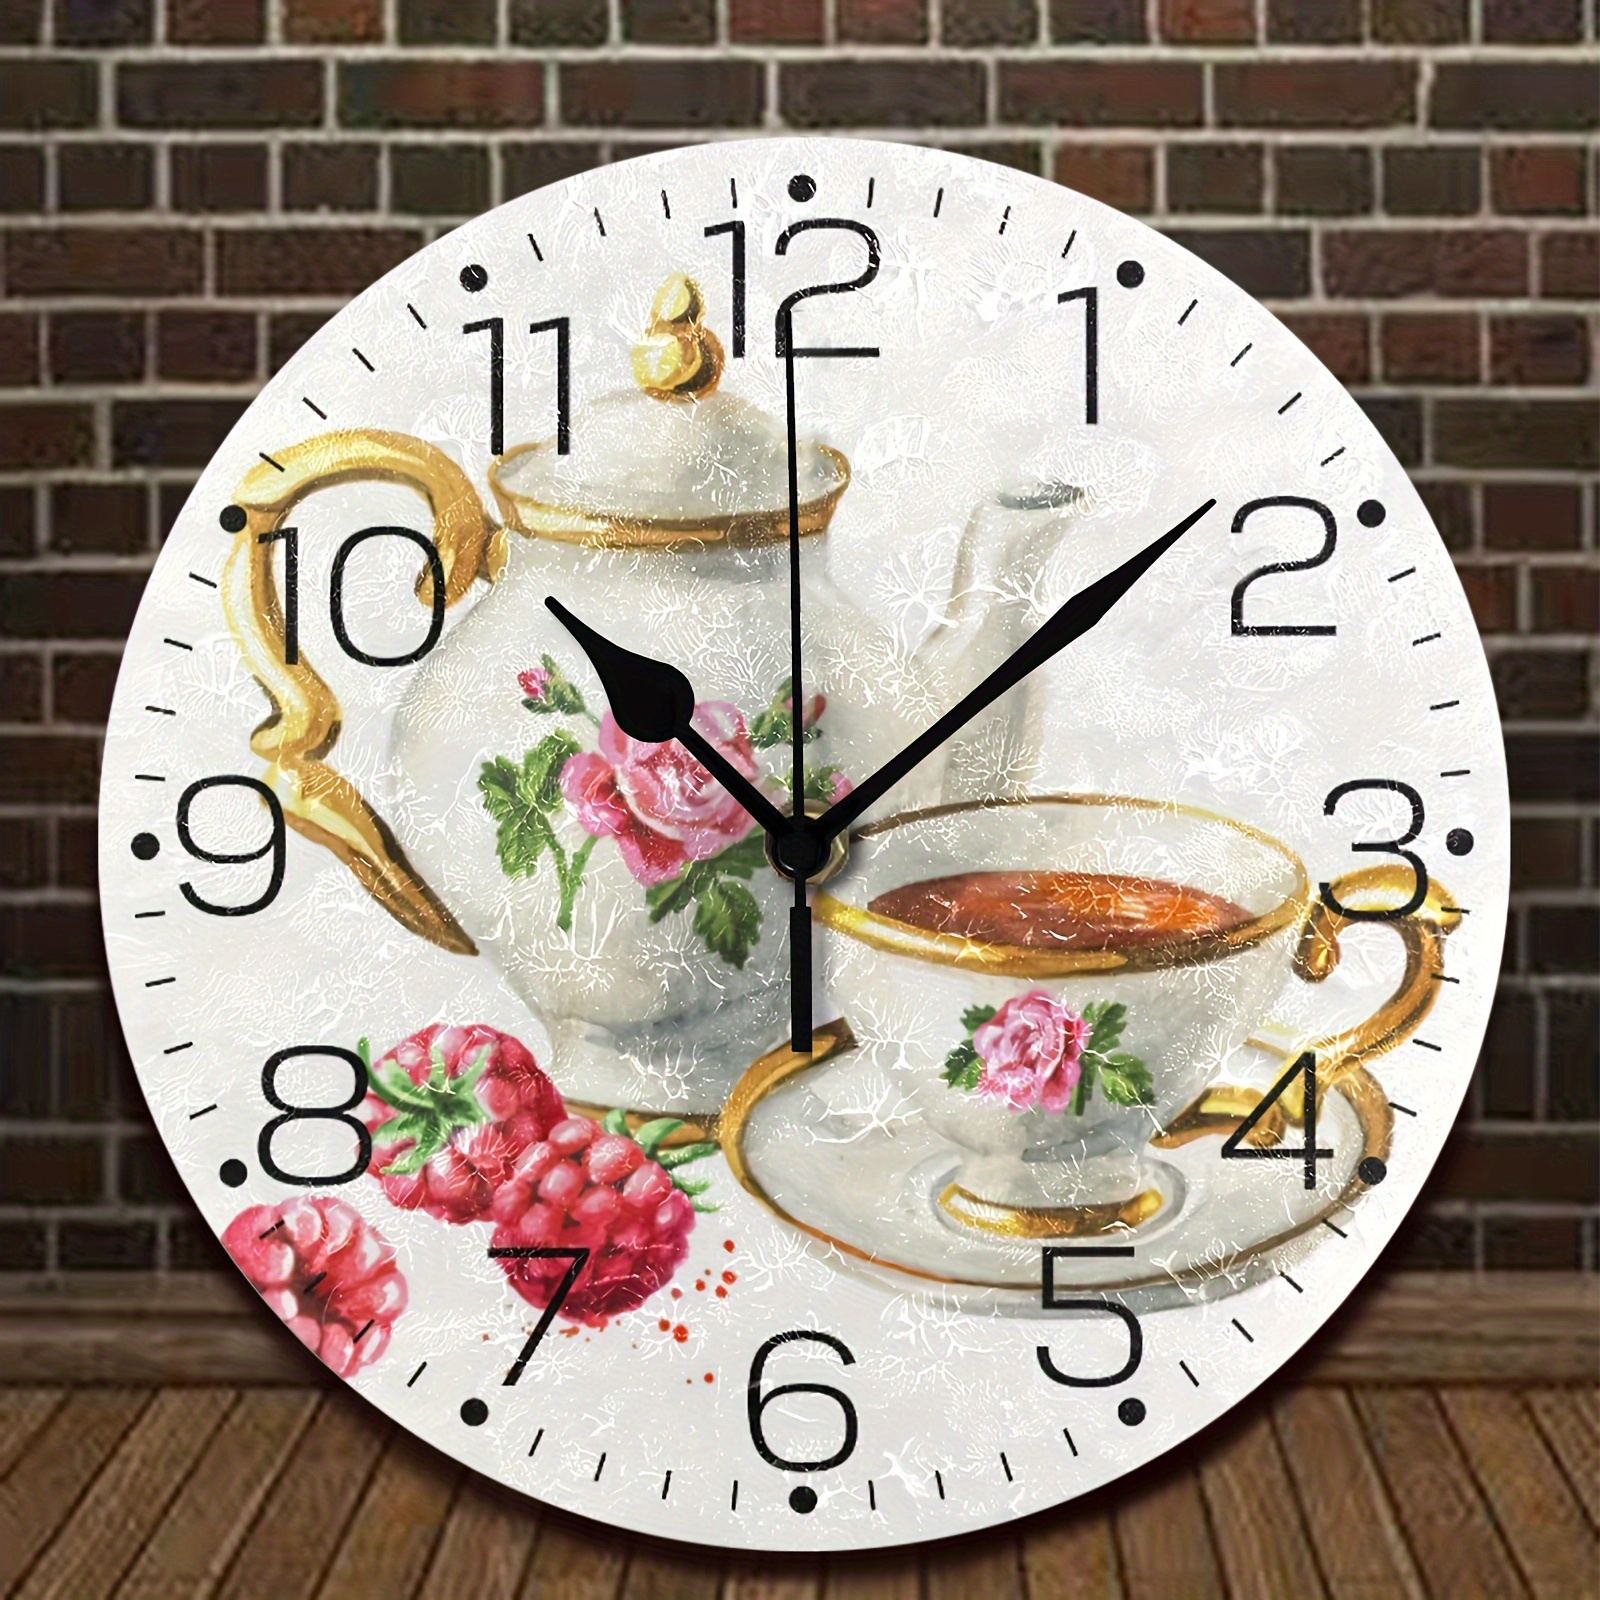 

1pc, 10in Cup Of Tea Style Wall Clock, Silent Wall Clock, Modern Round Decorative Wall Clock, For Living Room Kitchen Bedroom Office School Classroom Farmhouse Decor, Aa Battery (not Included)